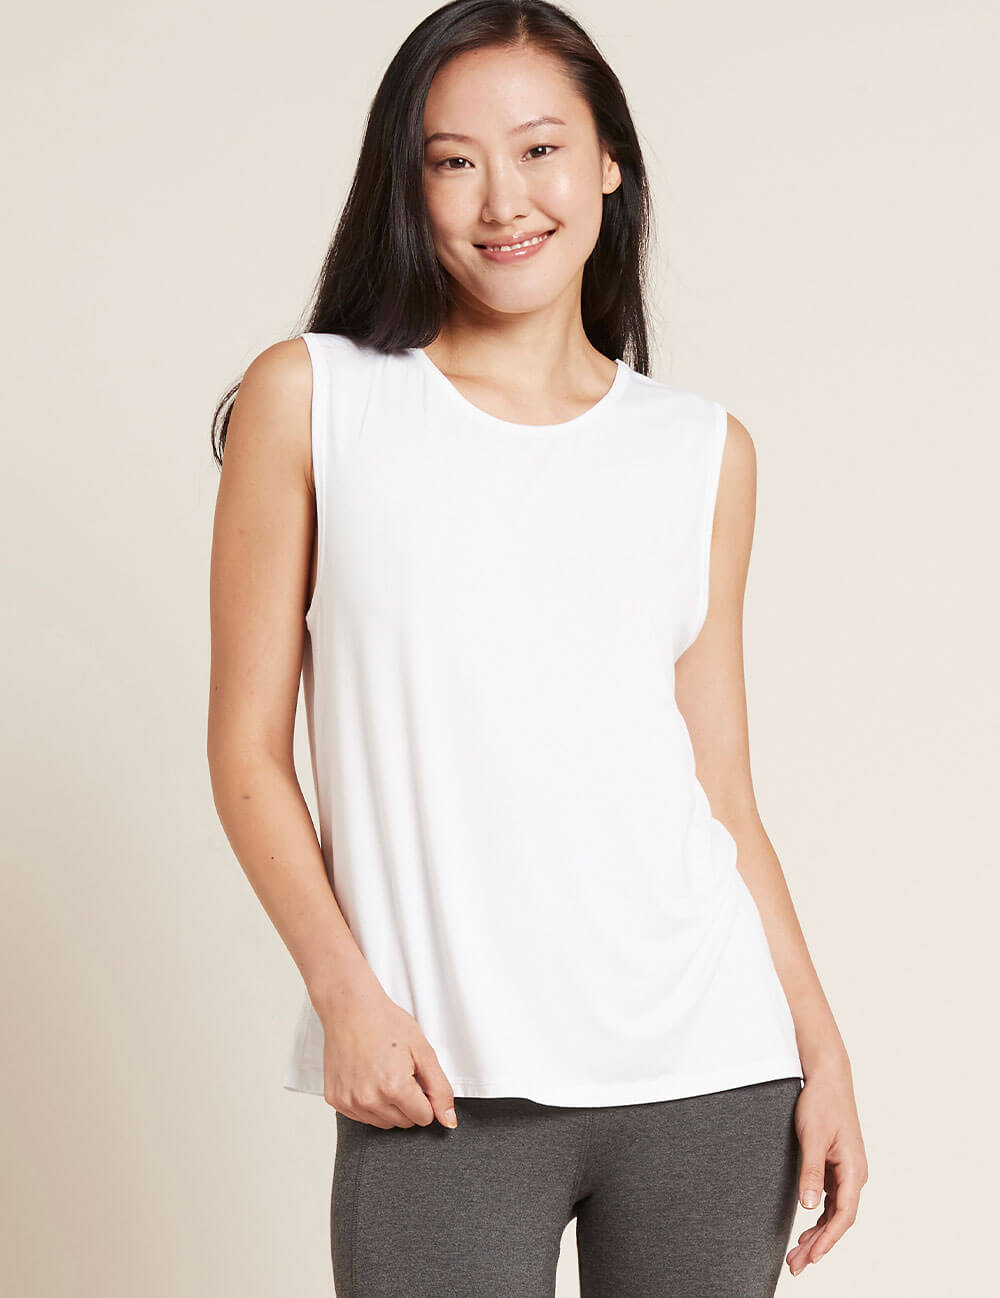 Women_s-Active-Muscle-Tank-Top-white-front.jpg